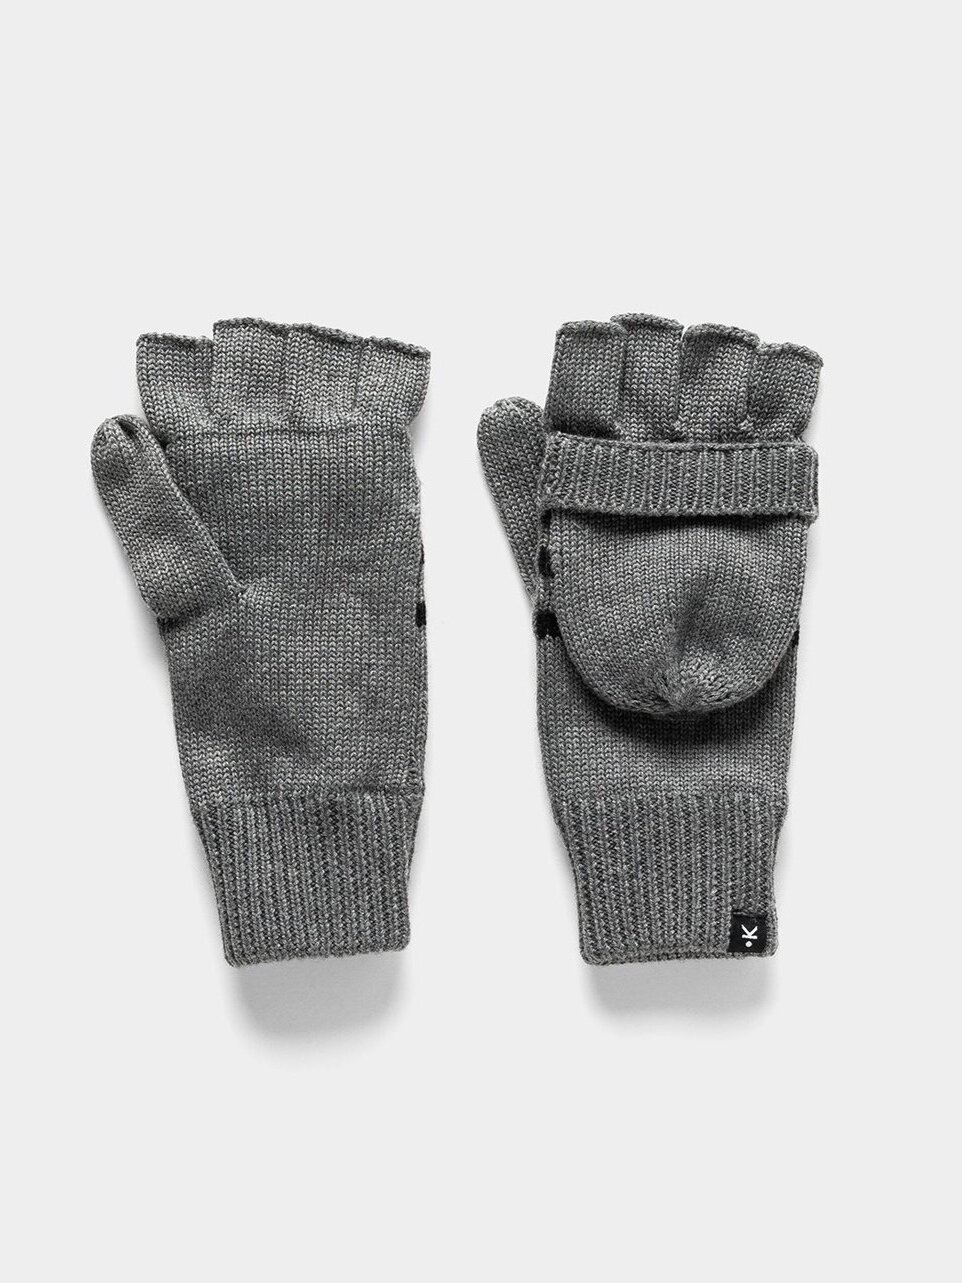 7 Pairs of Sustainable Winter Gloves for Warm, Toasty Hands 